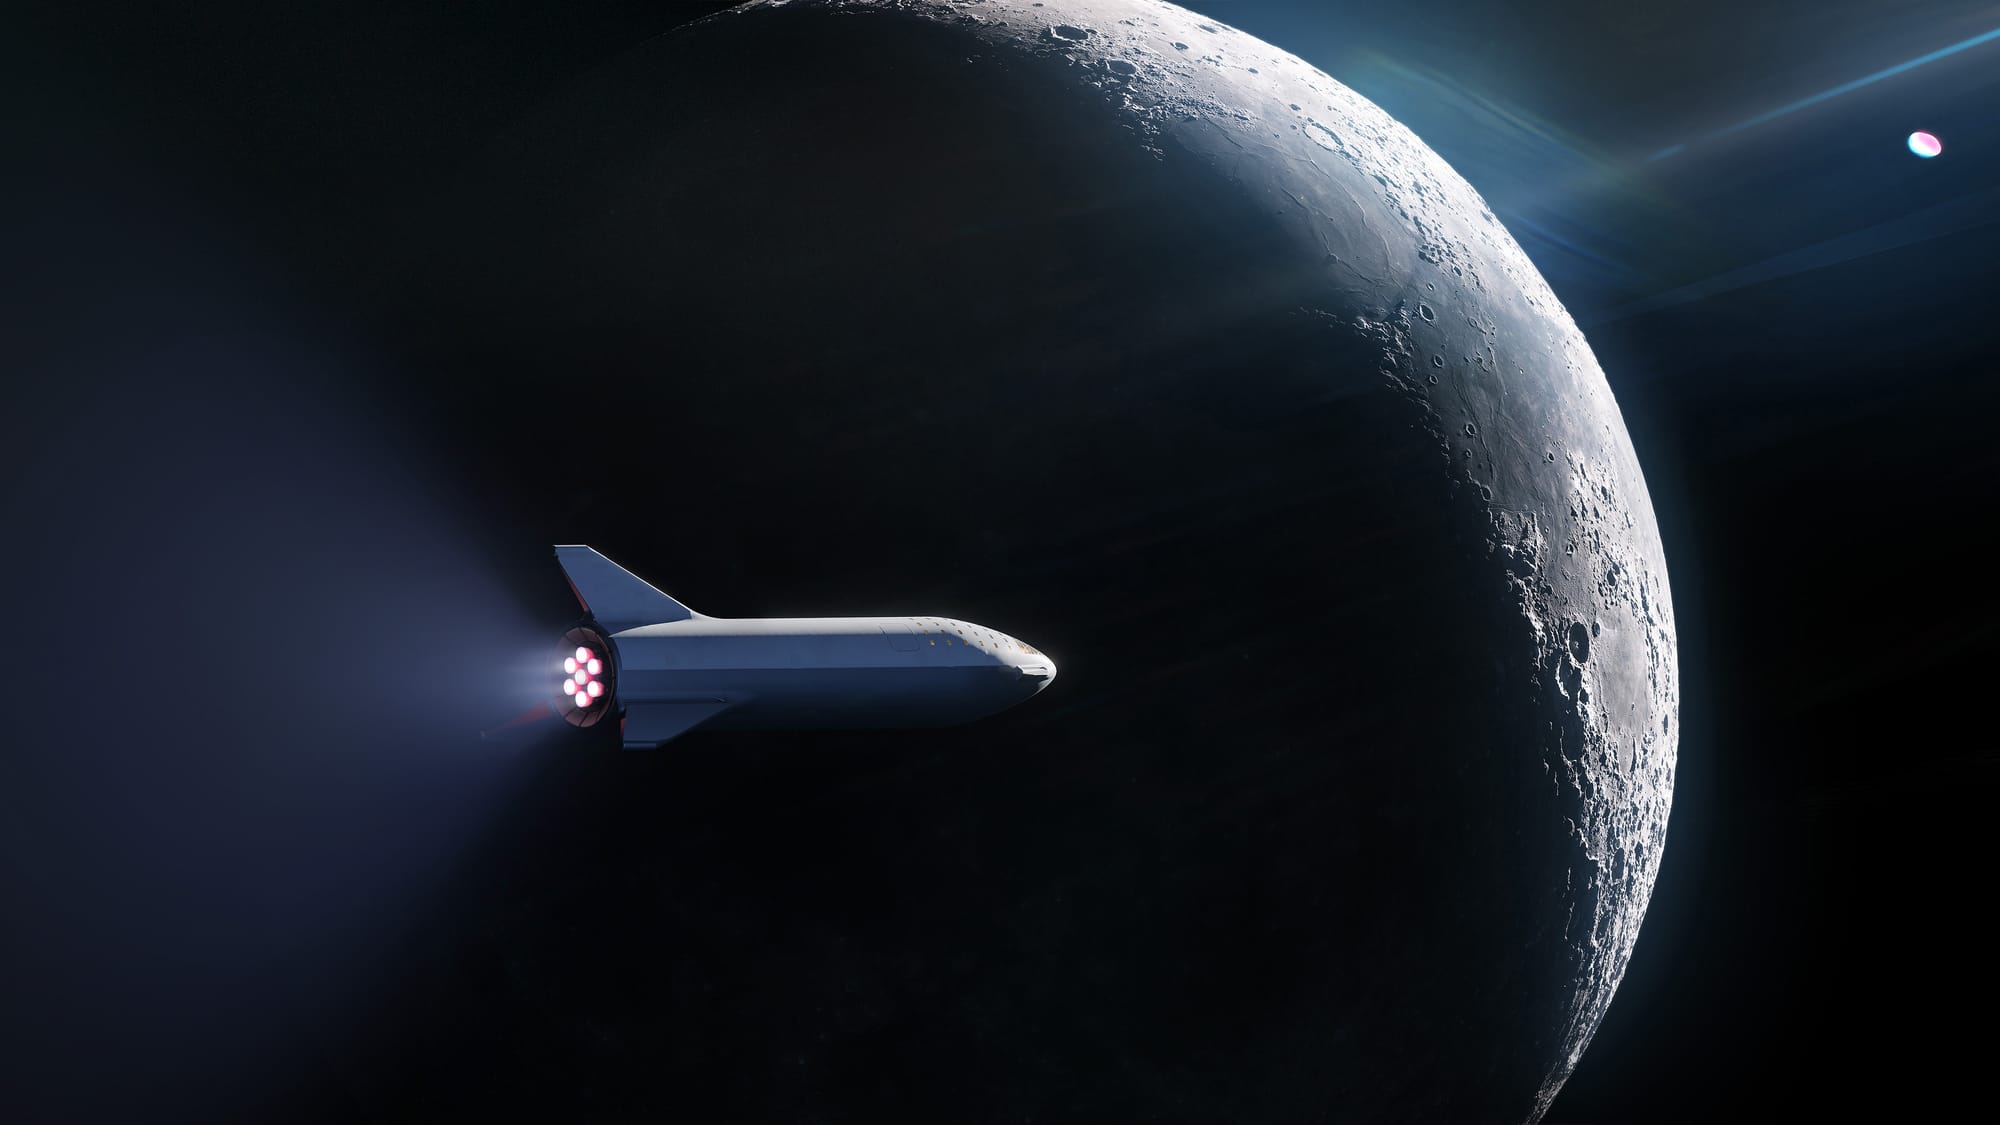 Starship in its 2018 design near the Moon. ©SpaceX